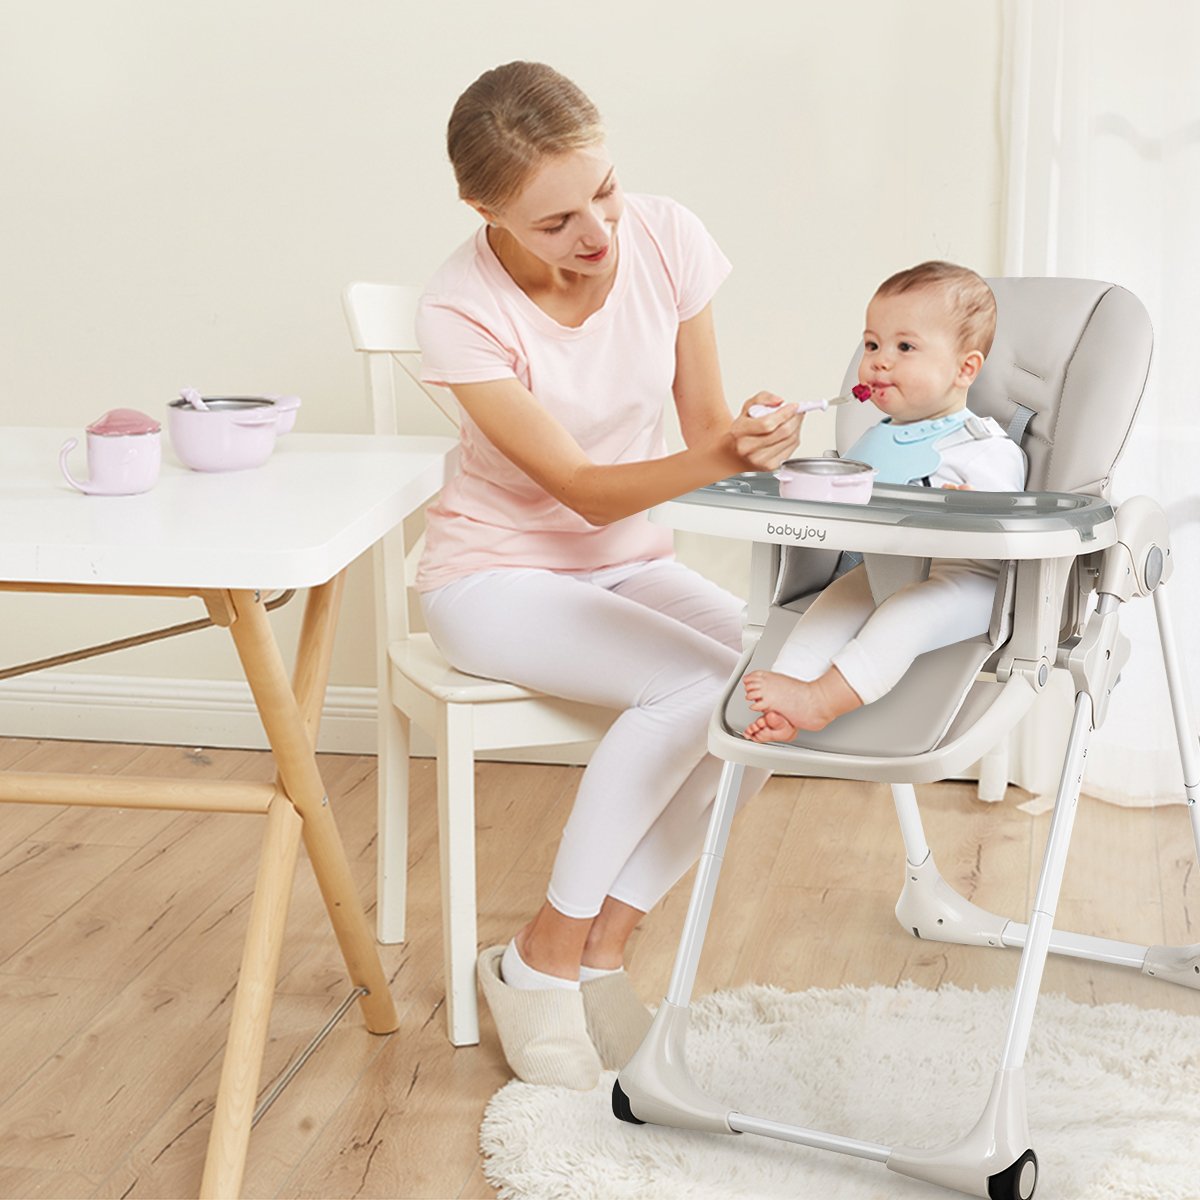 Baby Convertible High Chair with Wheels, Gray